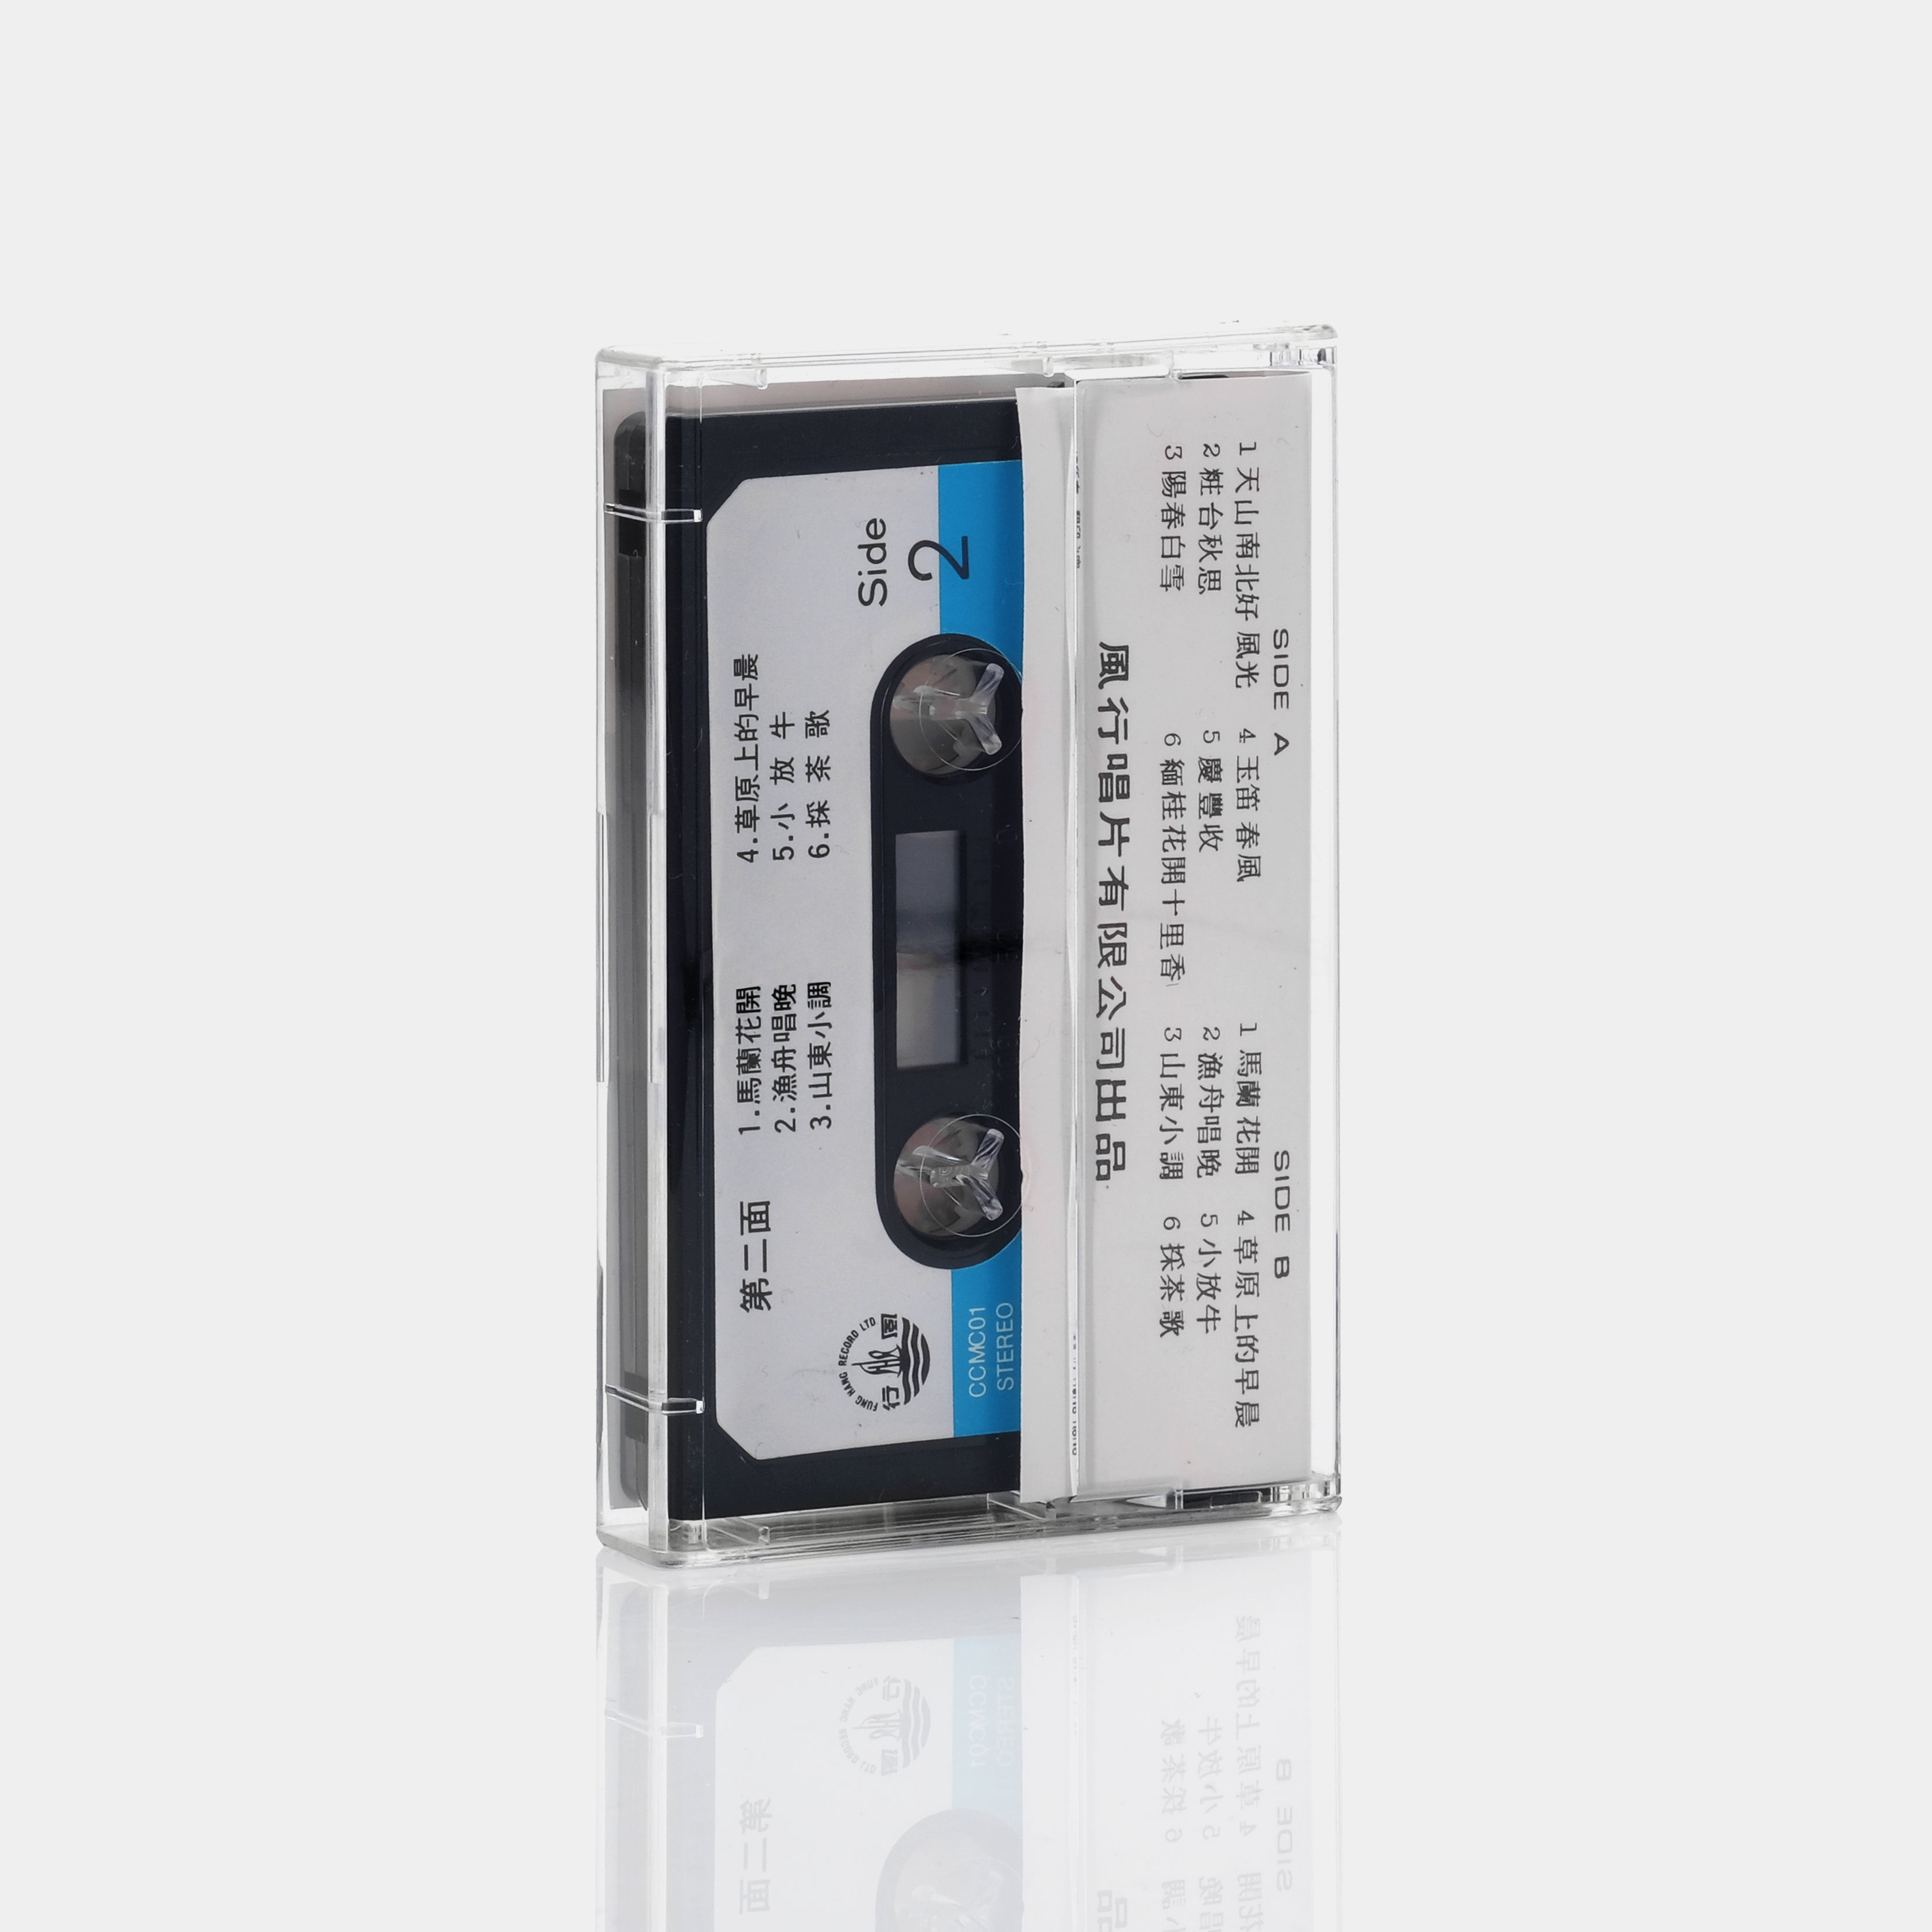 The Essence Of Chinese Folk Music Cassette Tape